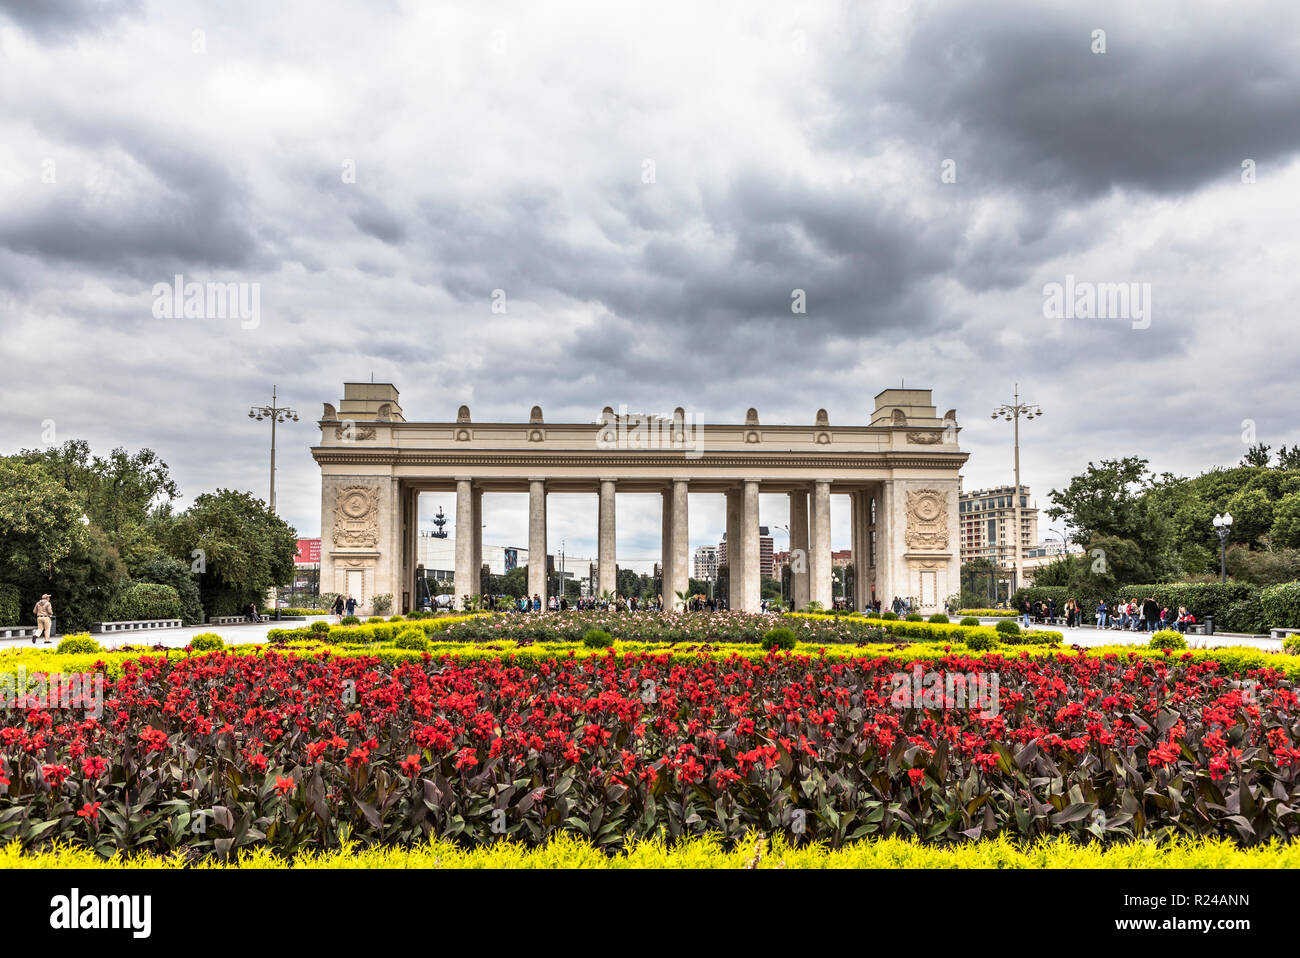 Gorky Park Museum, Gorky Park, Moscow, Russia, Europe Stock Photo